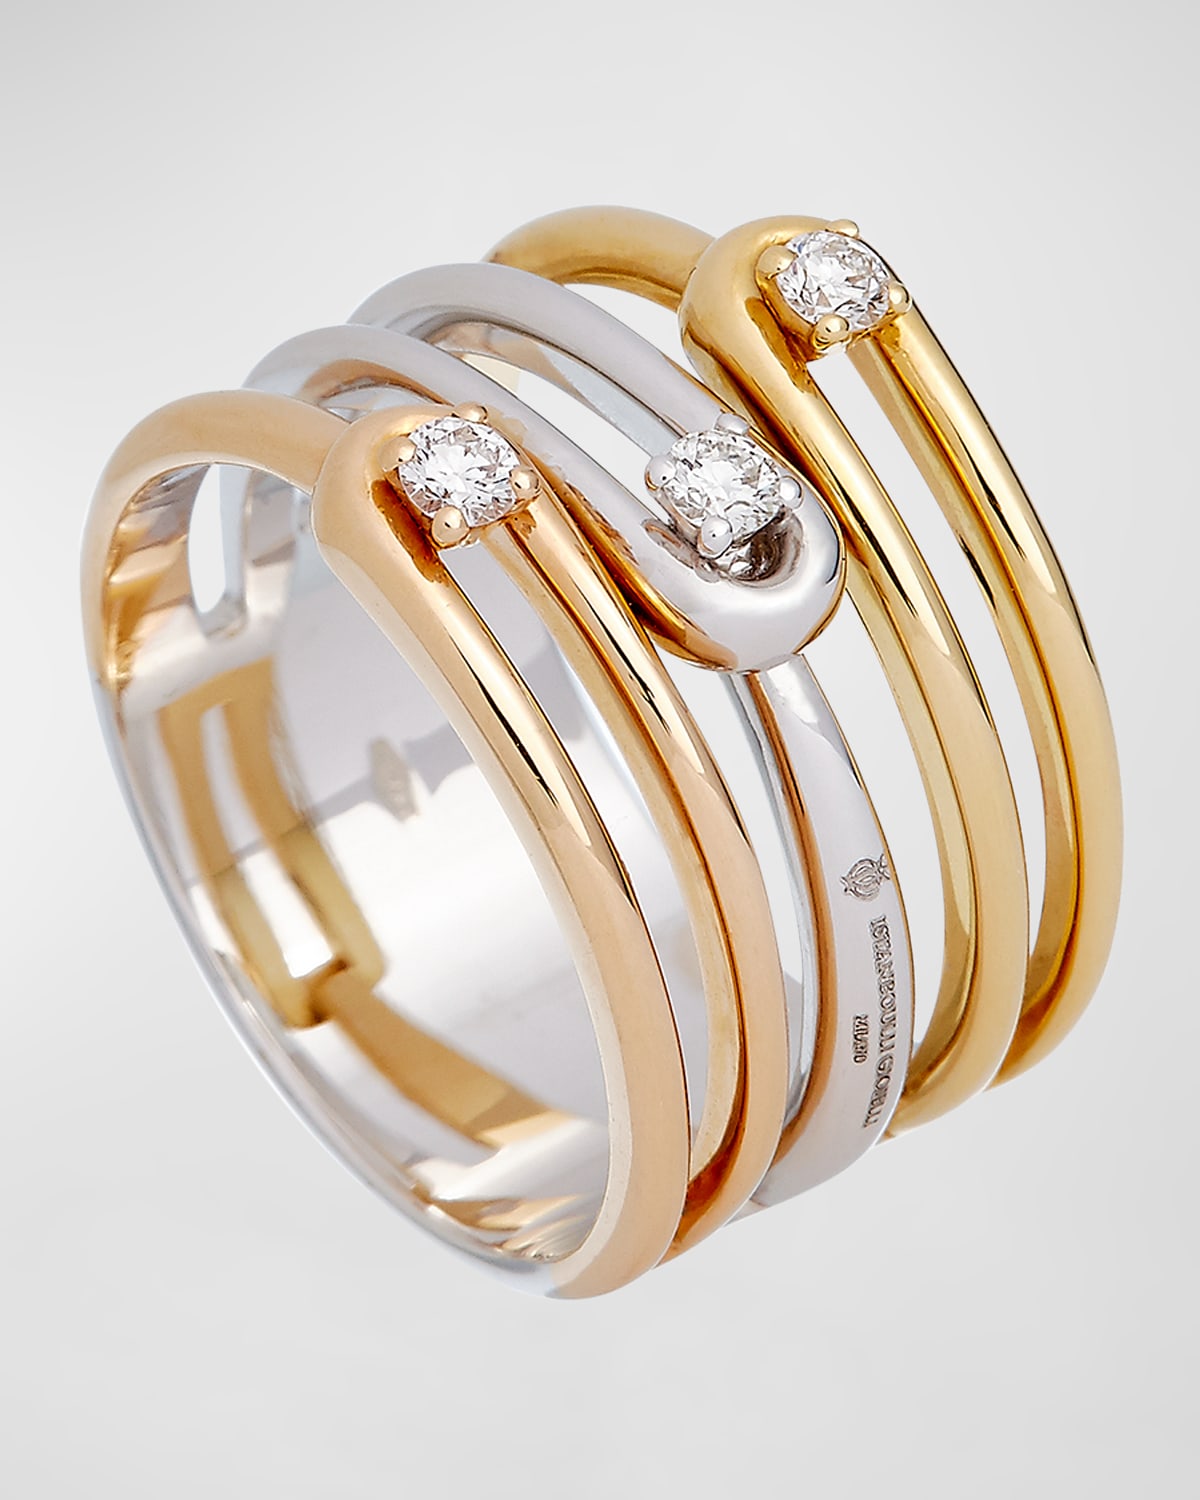 Krisonia 18k Yellow And White Gold Ring With Diamonds